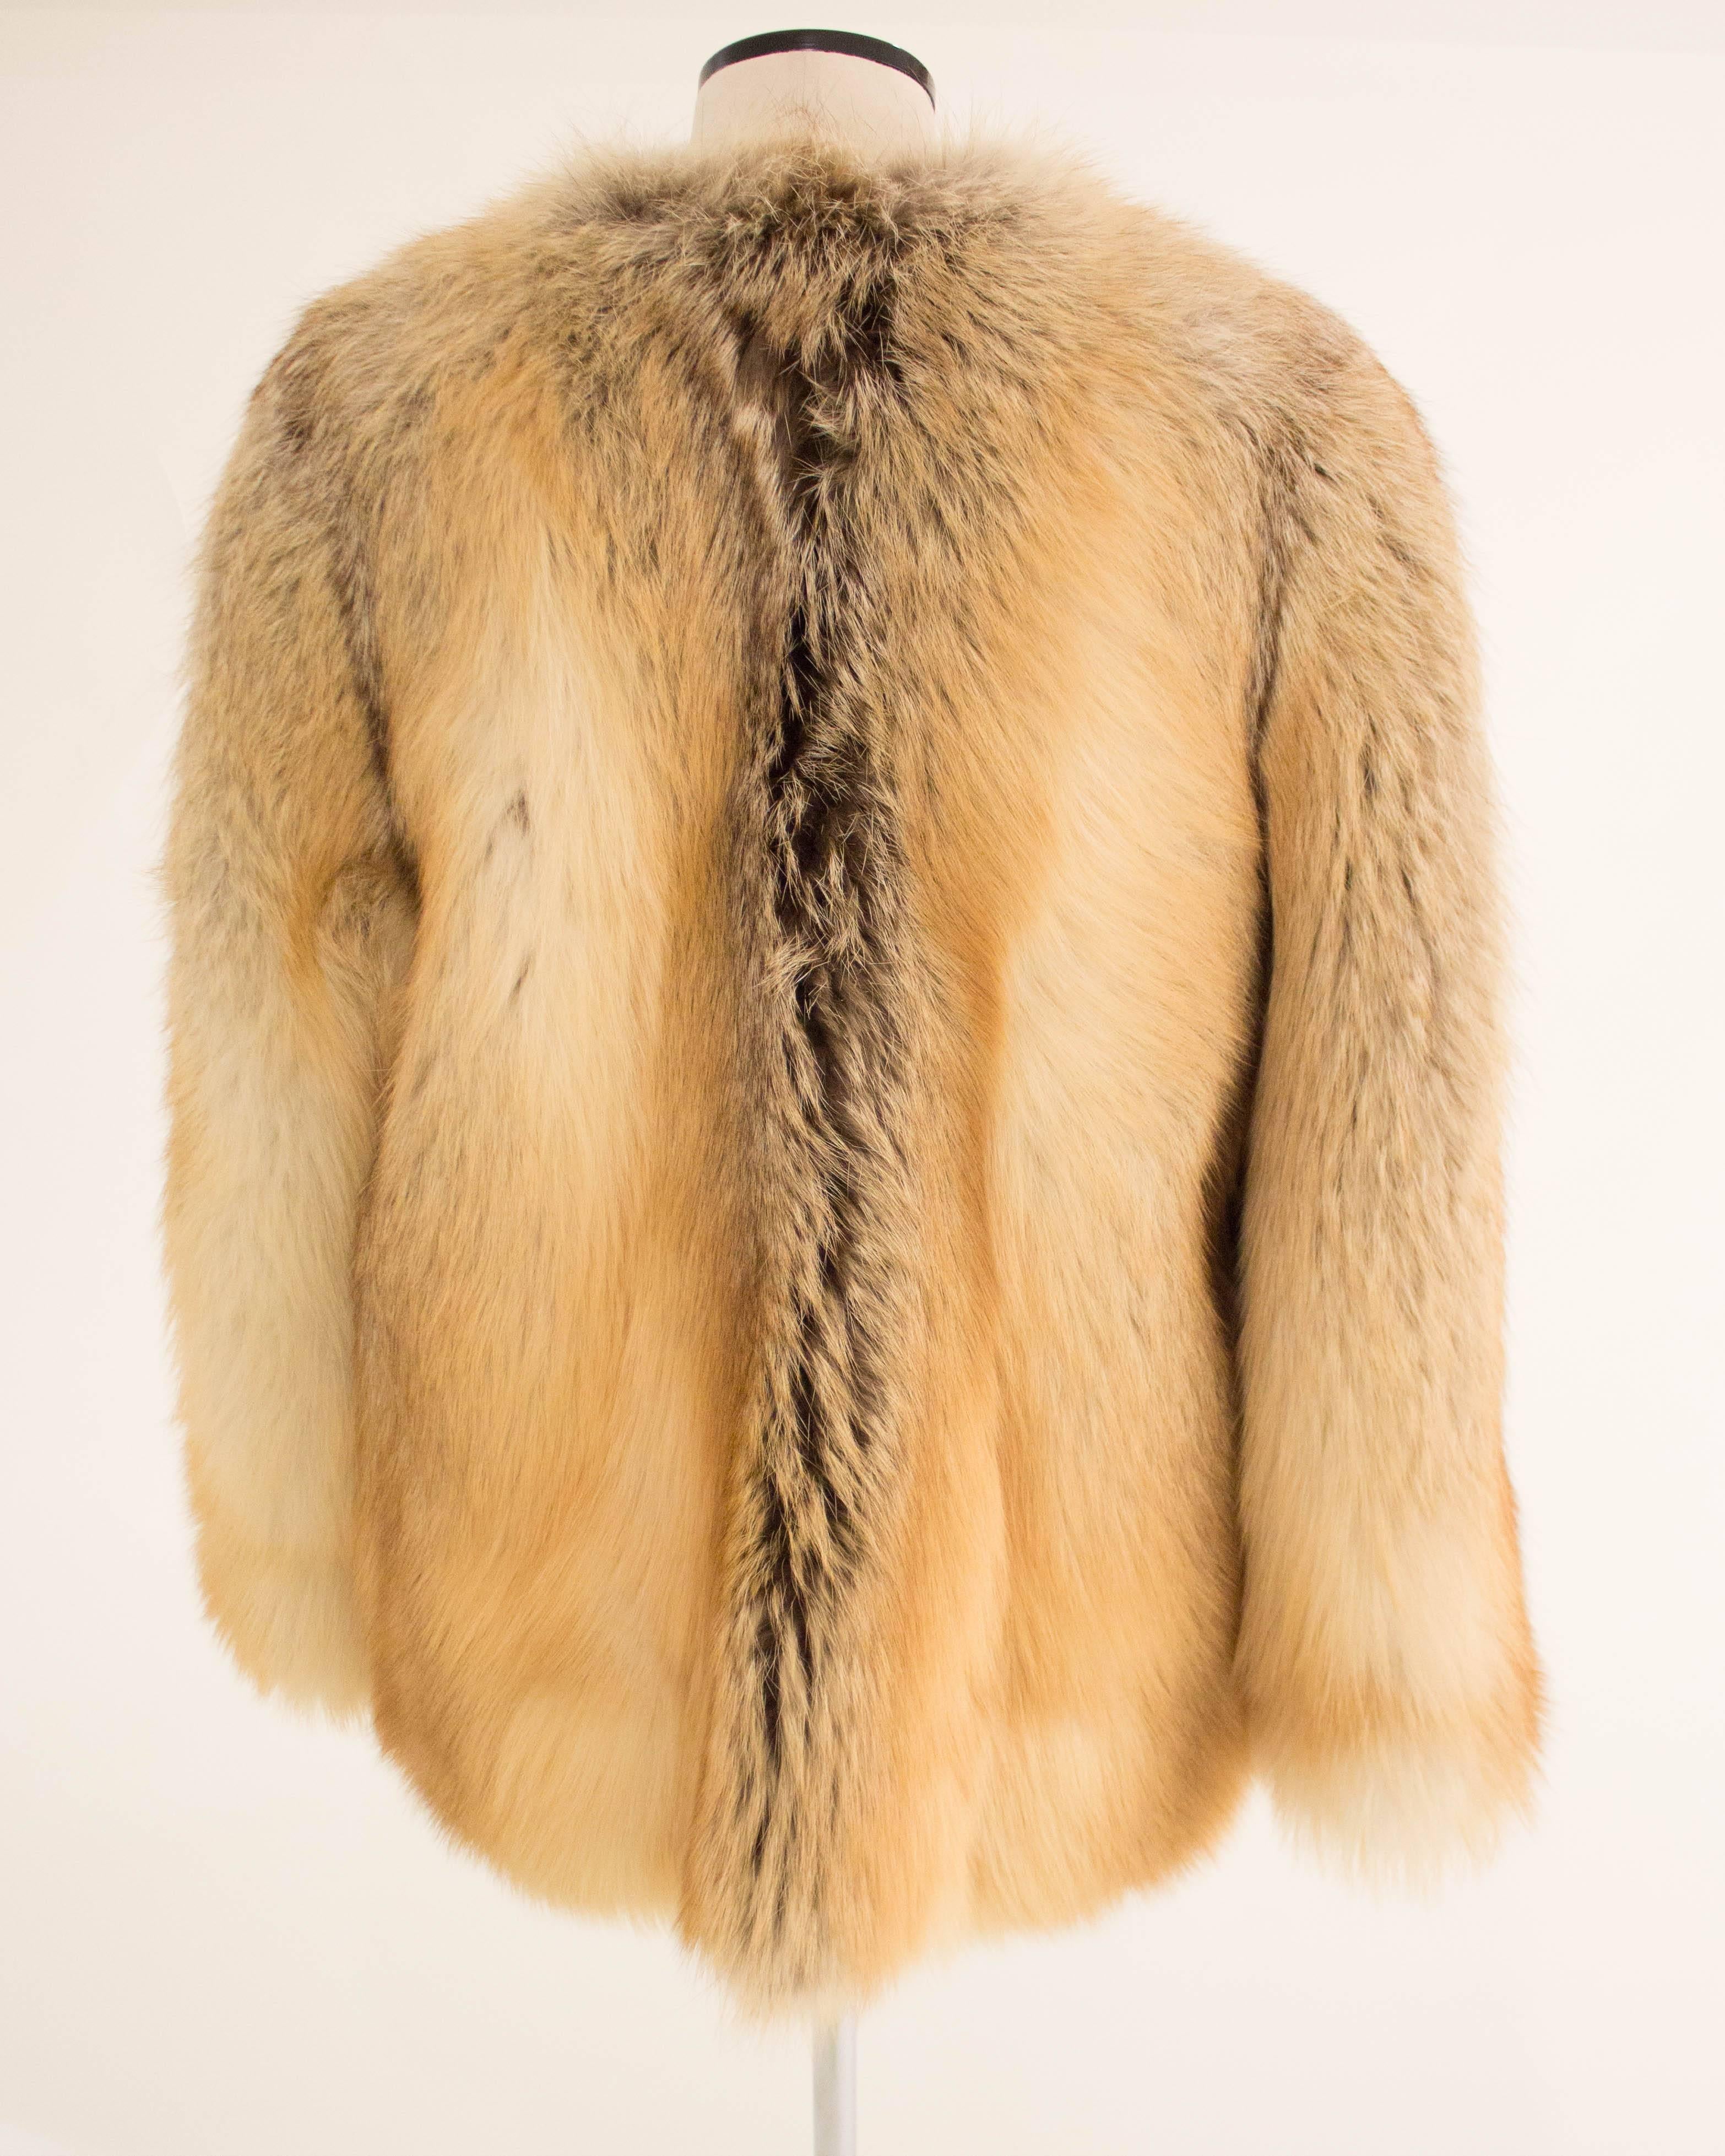 This fox fur coat is a rare runway sample from Alexander McQueen's short tenure at the storied fashion house, Givenchy. Entirely assembled and lined by hand in Paris, this fur coat is a striking example of McQueen's brilliance and an important